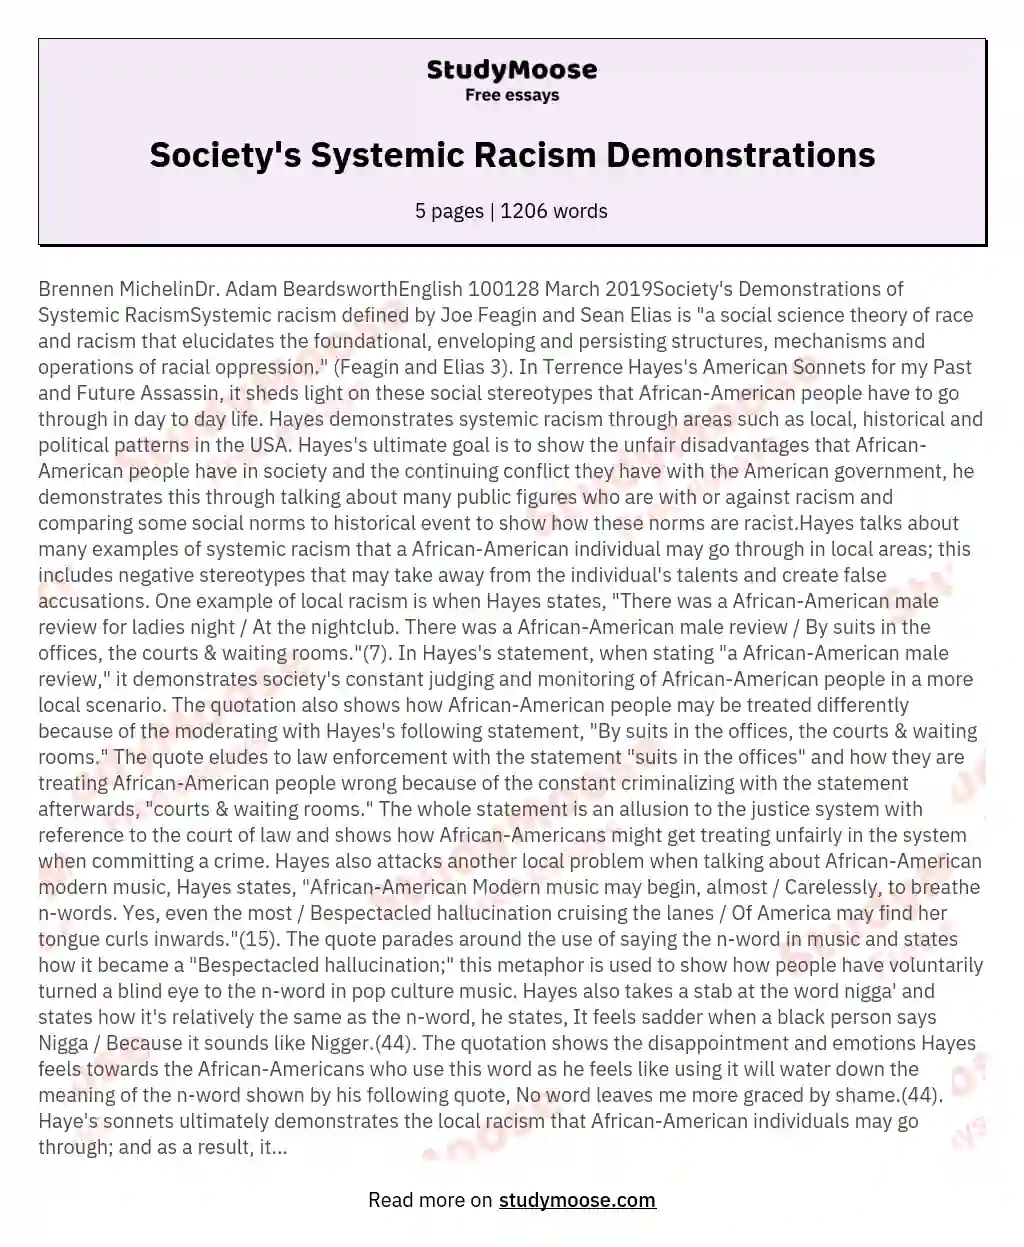 Brennen MichelinDr Adam BeardsworthEnglish 100128 March 2019Society's Demonstrations of Systemic RacismSystemic racism